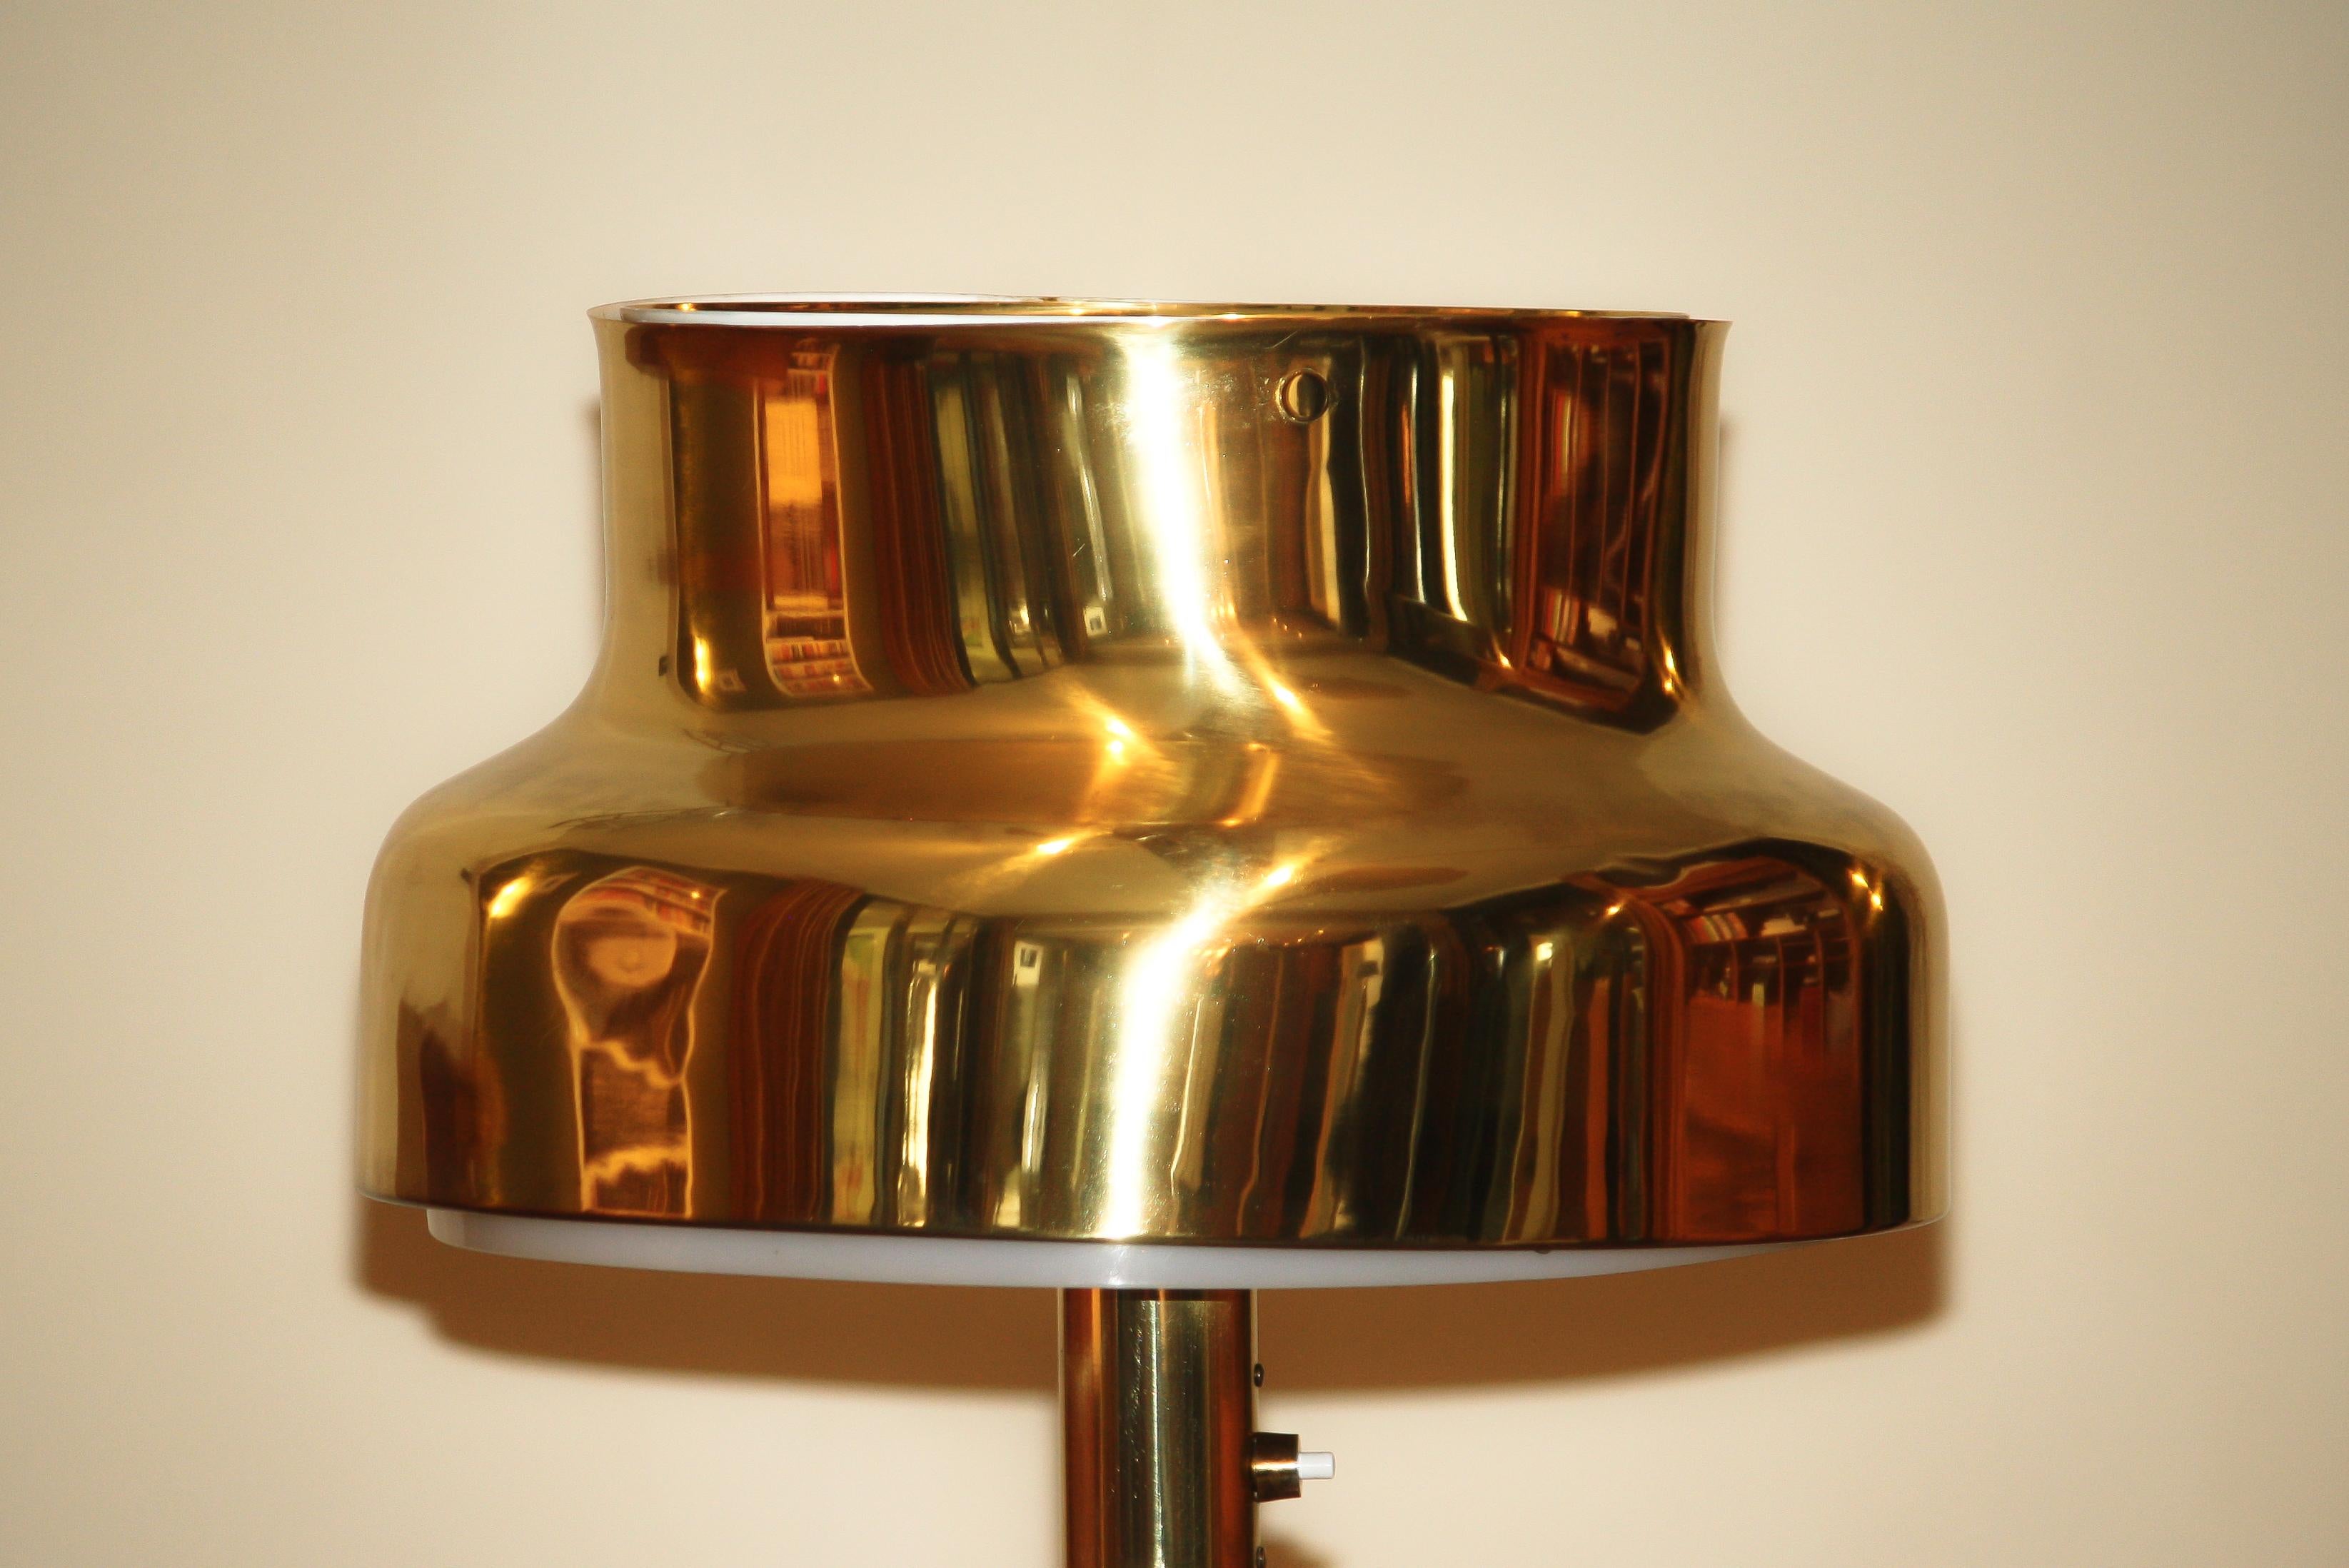 1960s Golden or Brass Floor Lamp by Anders Pehrson ‘Bumling’ for Ateljé Lyktan (Messing)